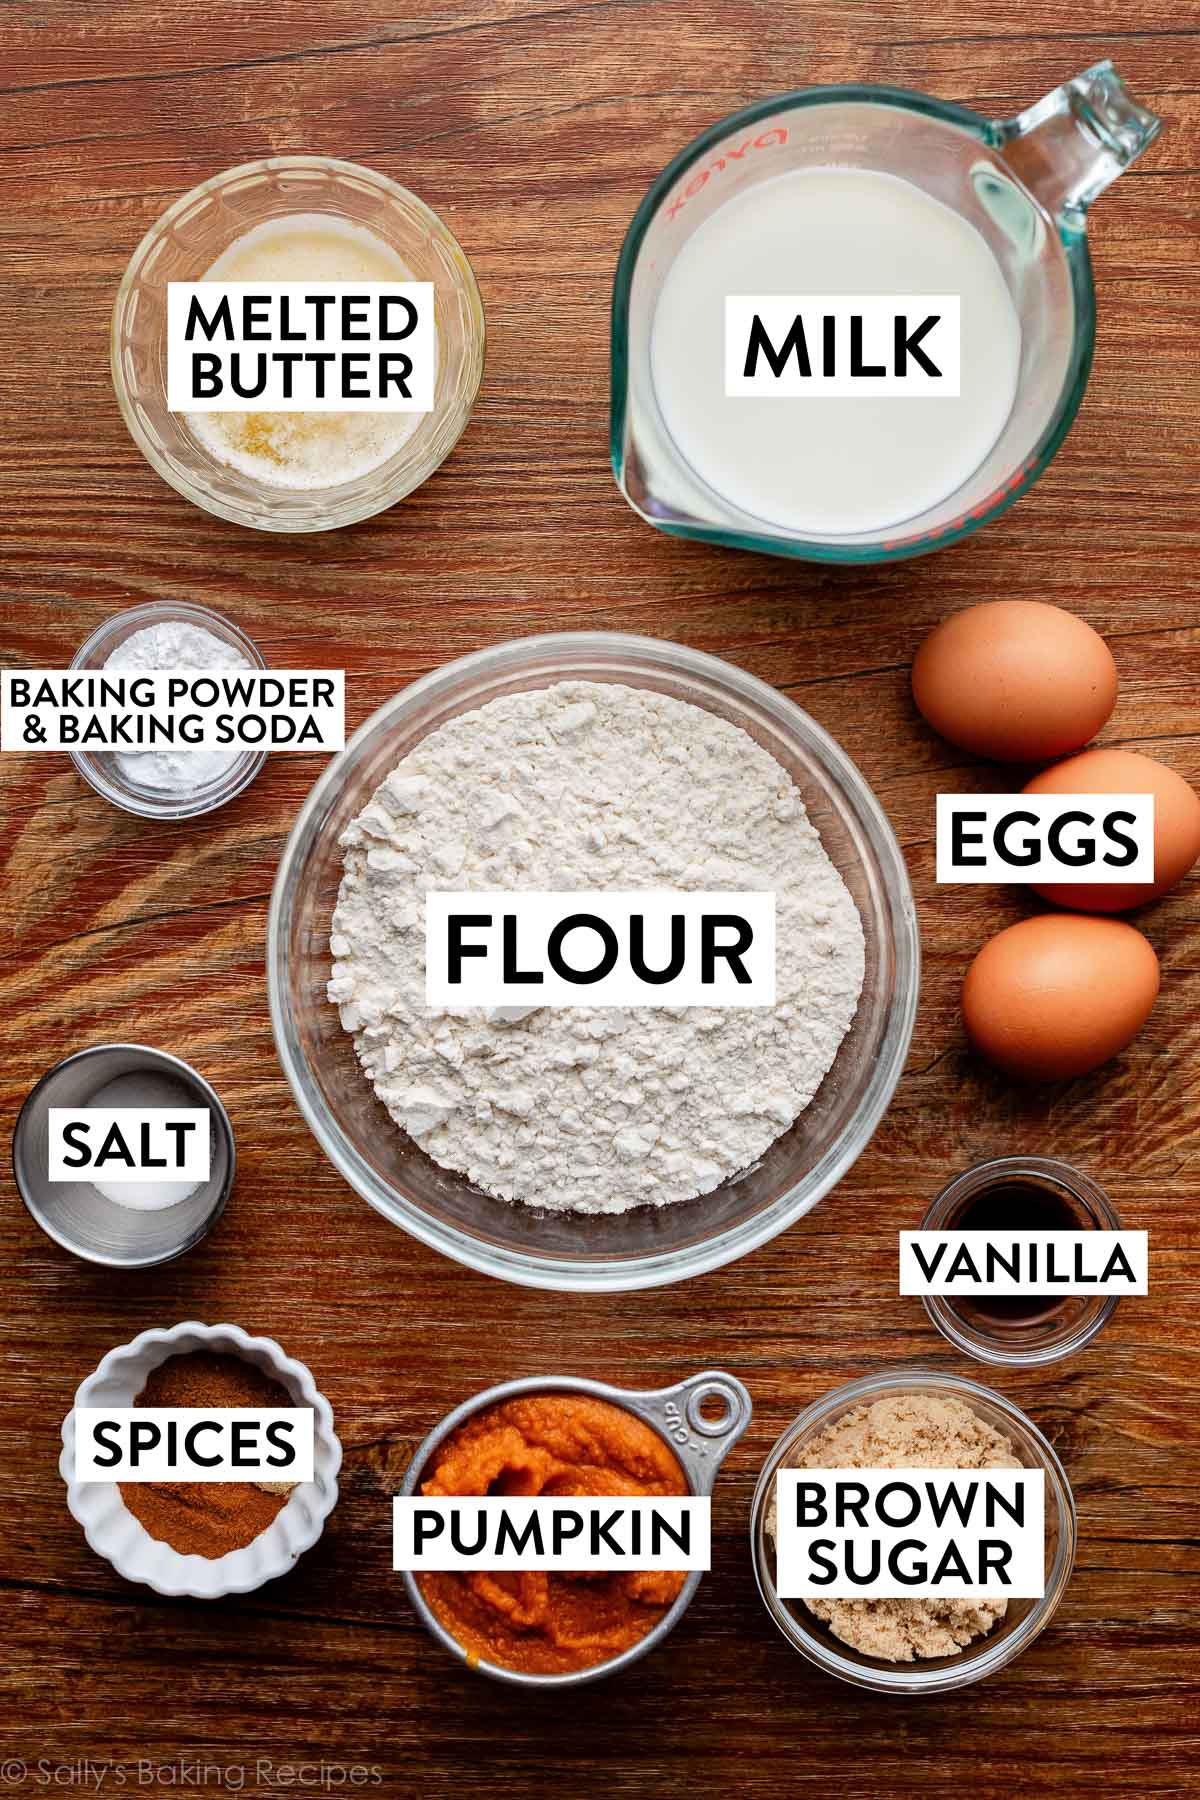 ingredients in bowls on a wooden surface including flour, milk, melted butter, brown sugar, pumpkin, spices, vanilla, salt and eggs.